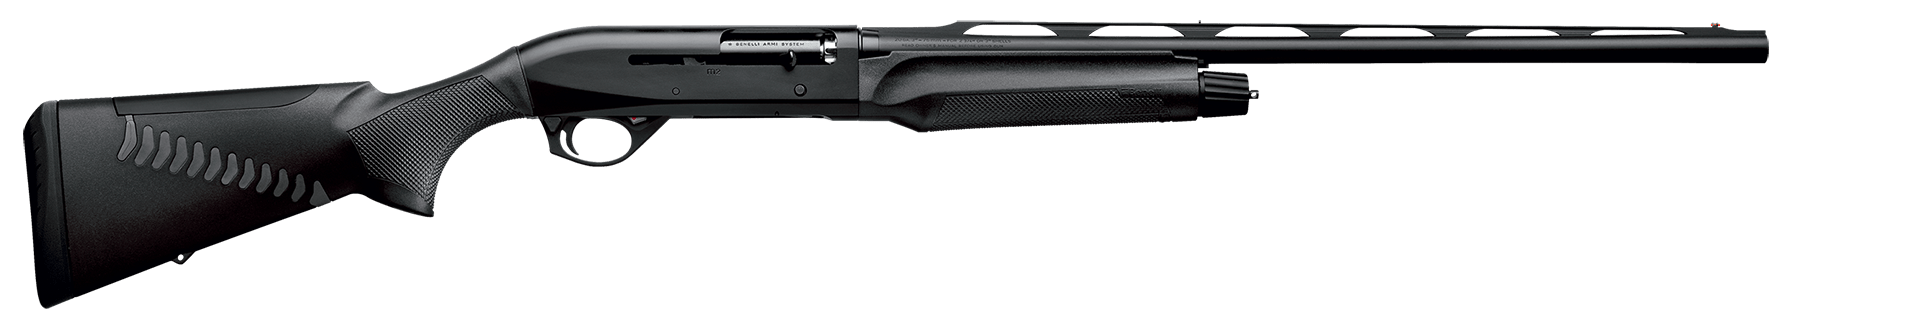 benelli-m2-comfortech-20-compact.png